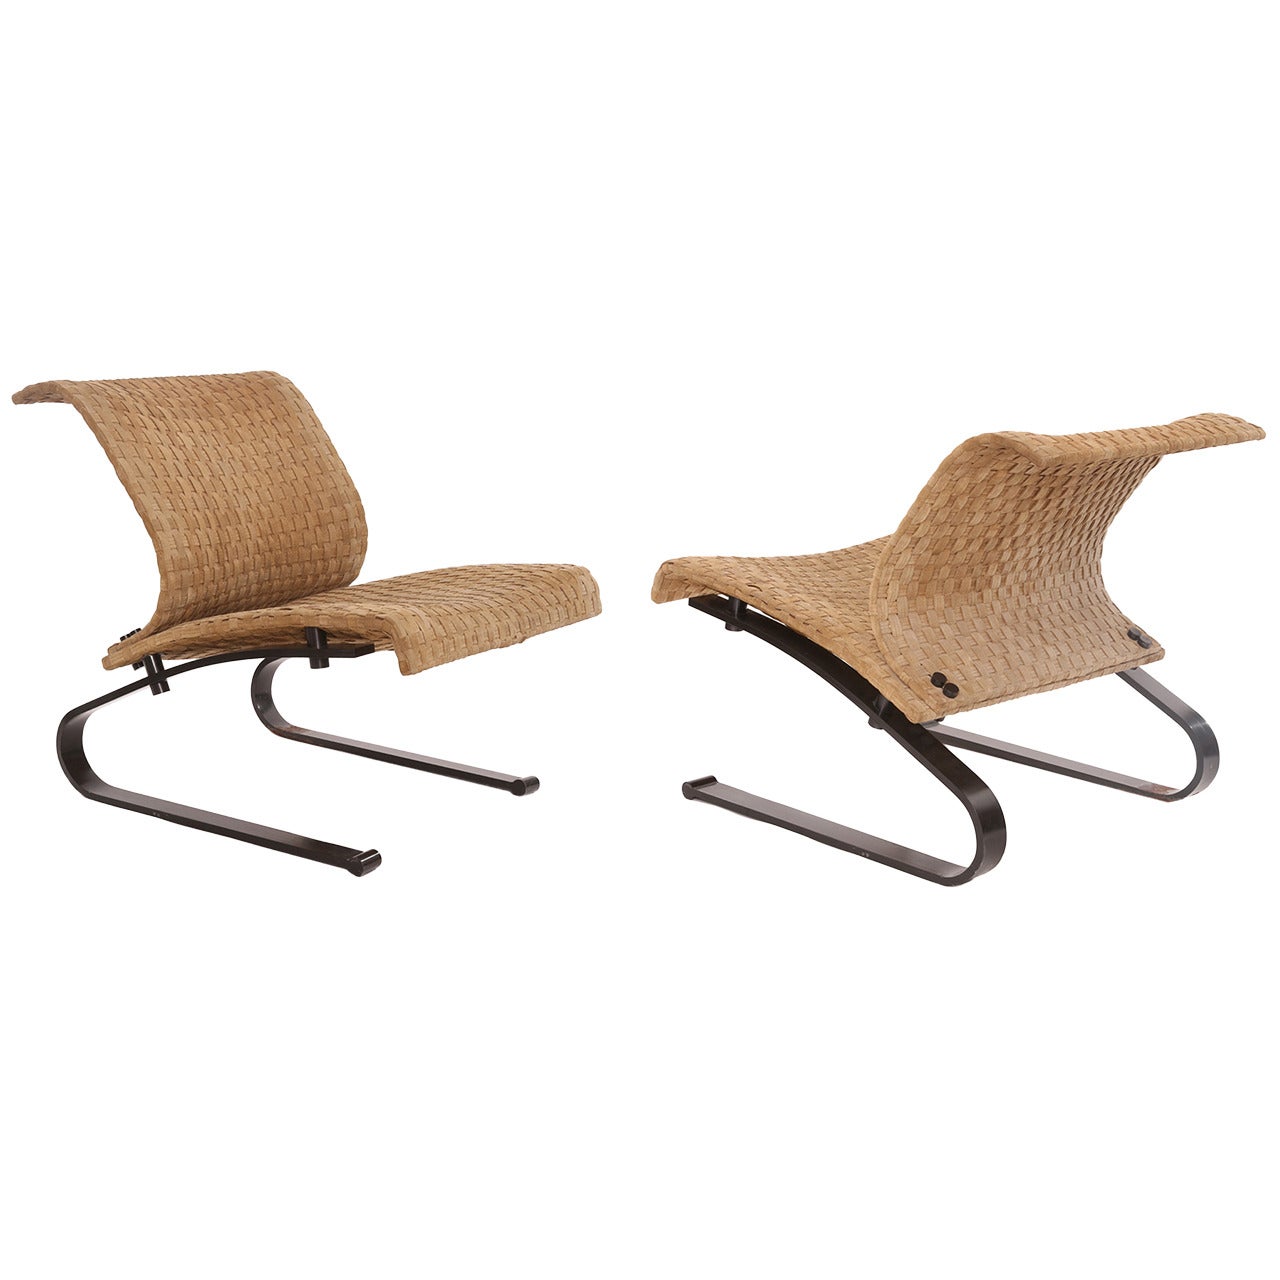 Pair of Bronze and Woven Suede Lounge Chairs by Saporiti